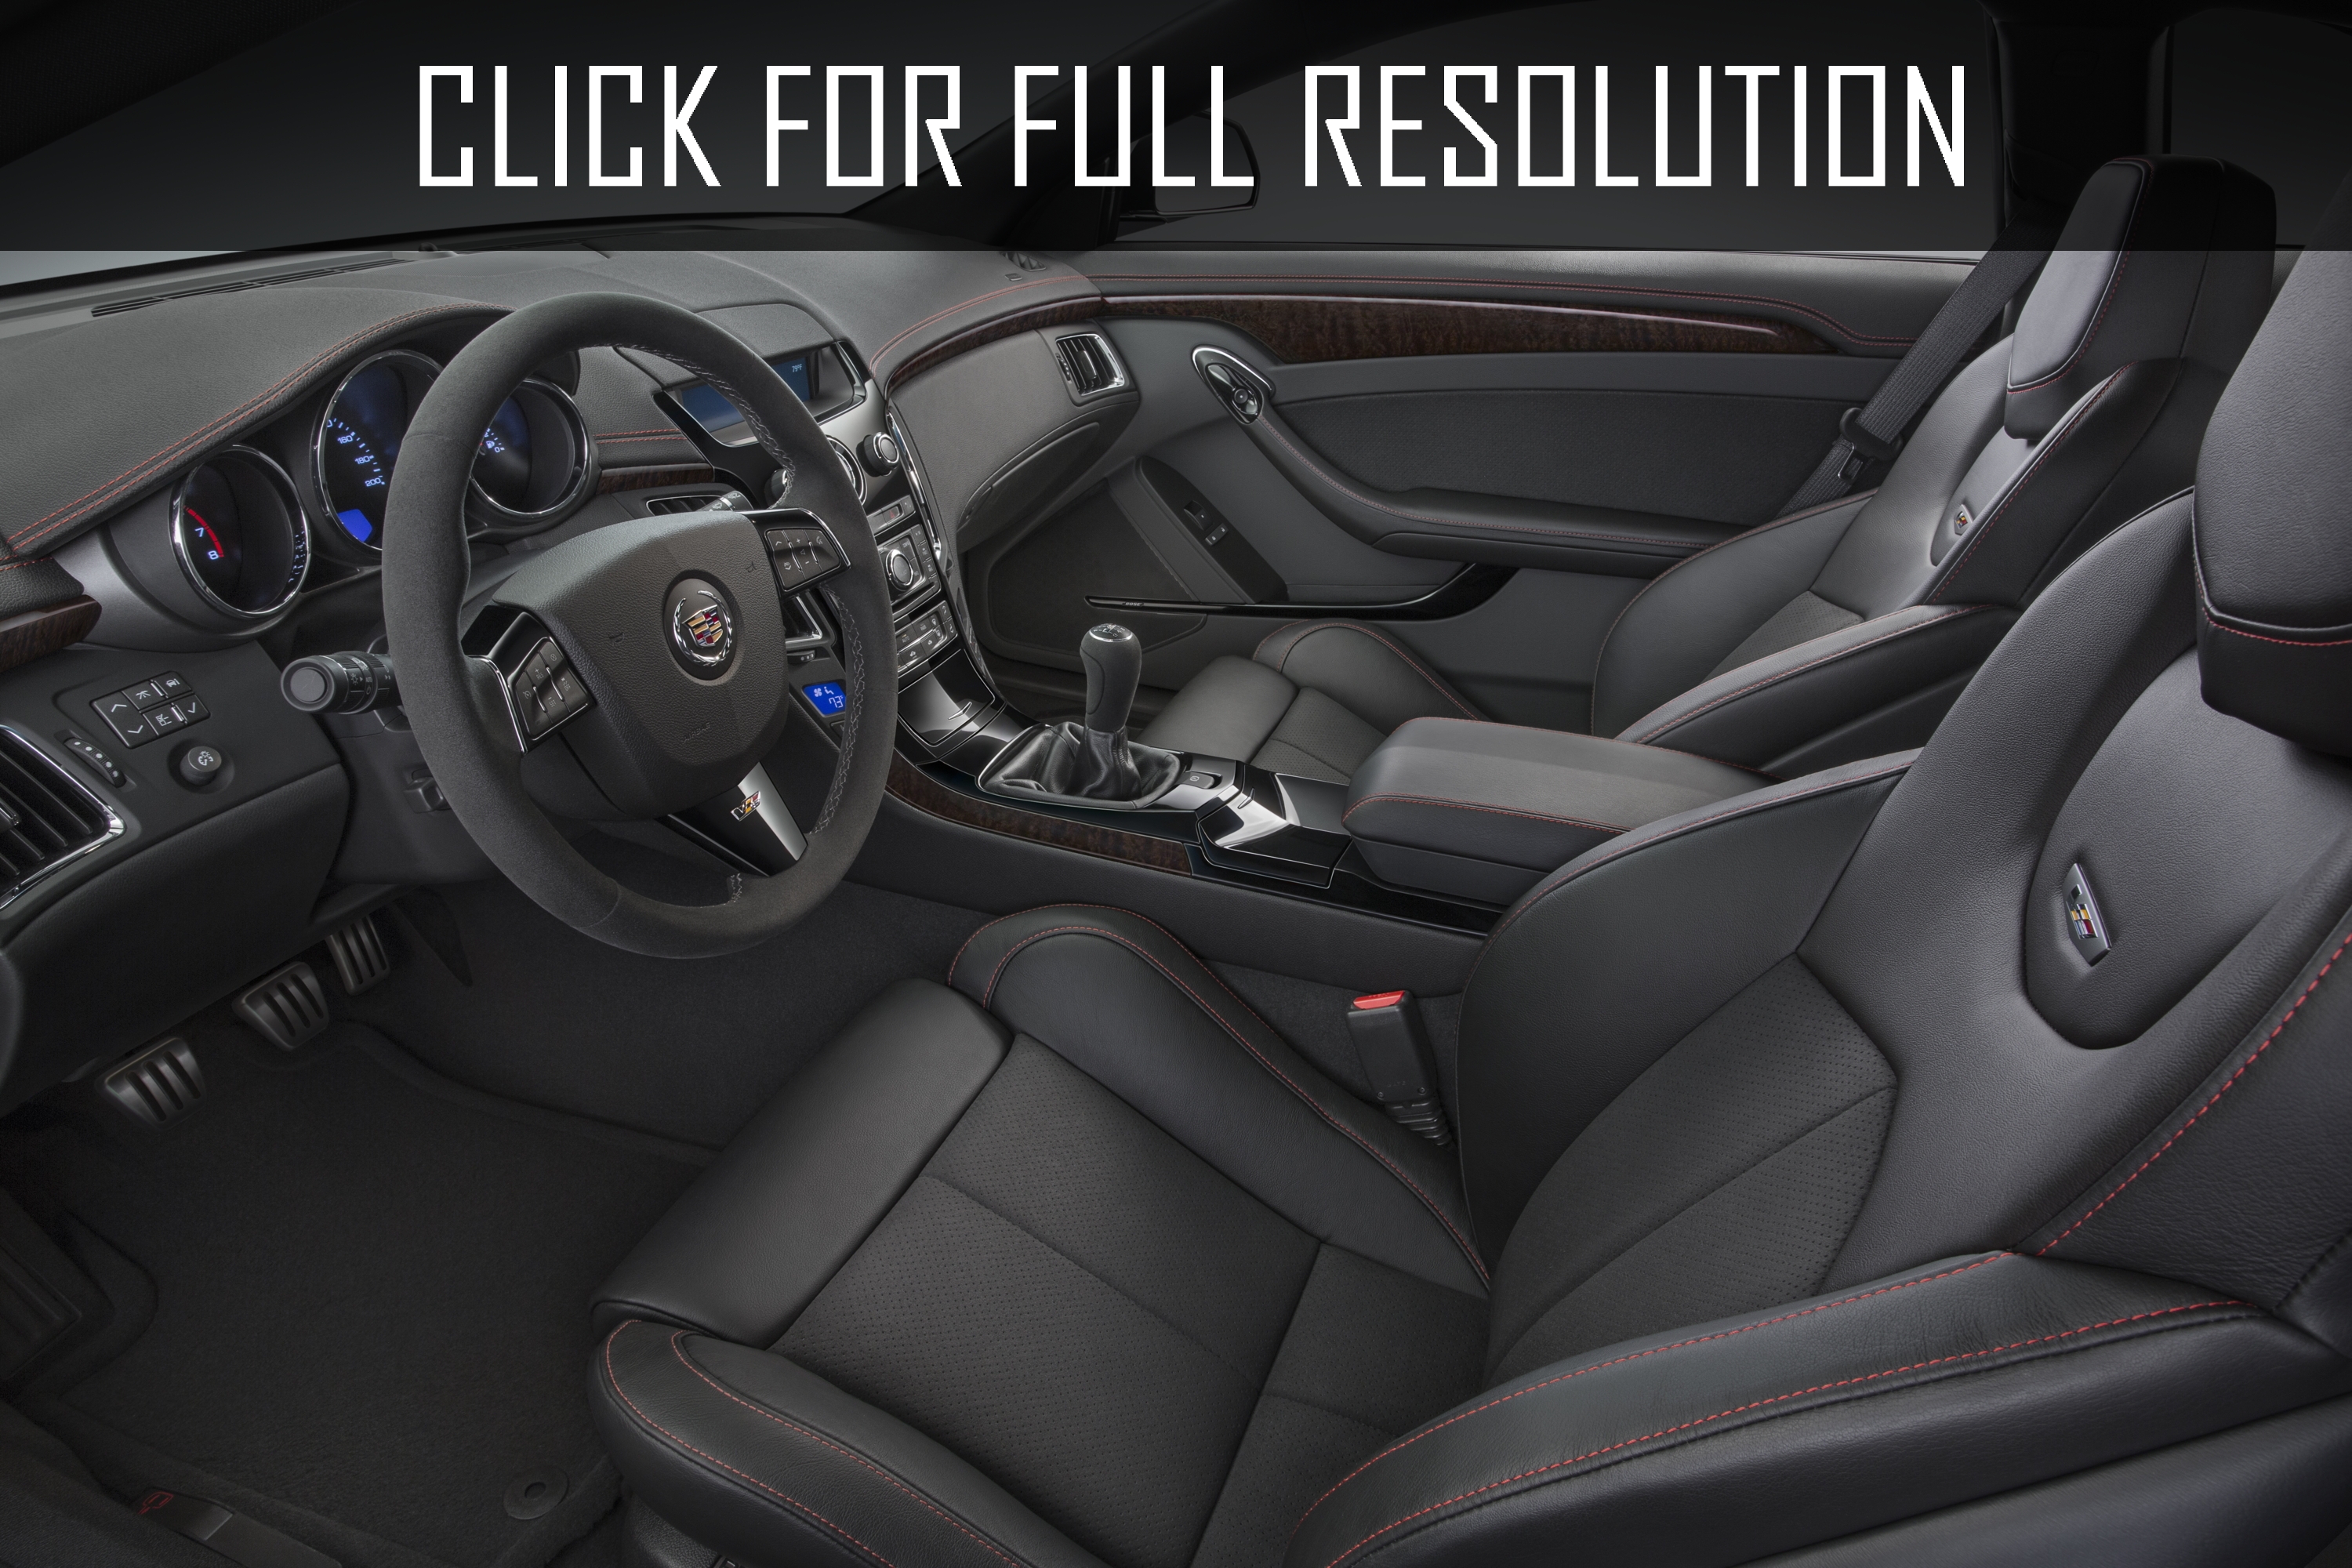 2016 Cadillac Cts V Coupe Best Image Gallery 1 15 Share